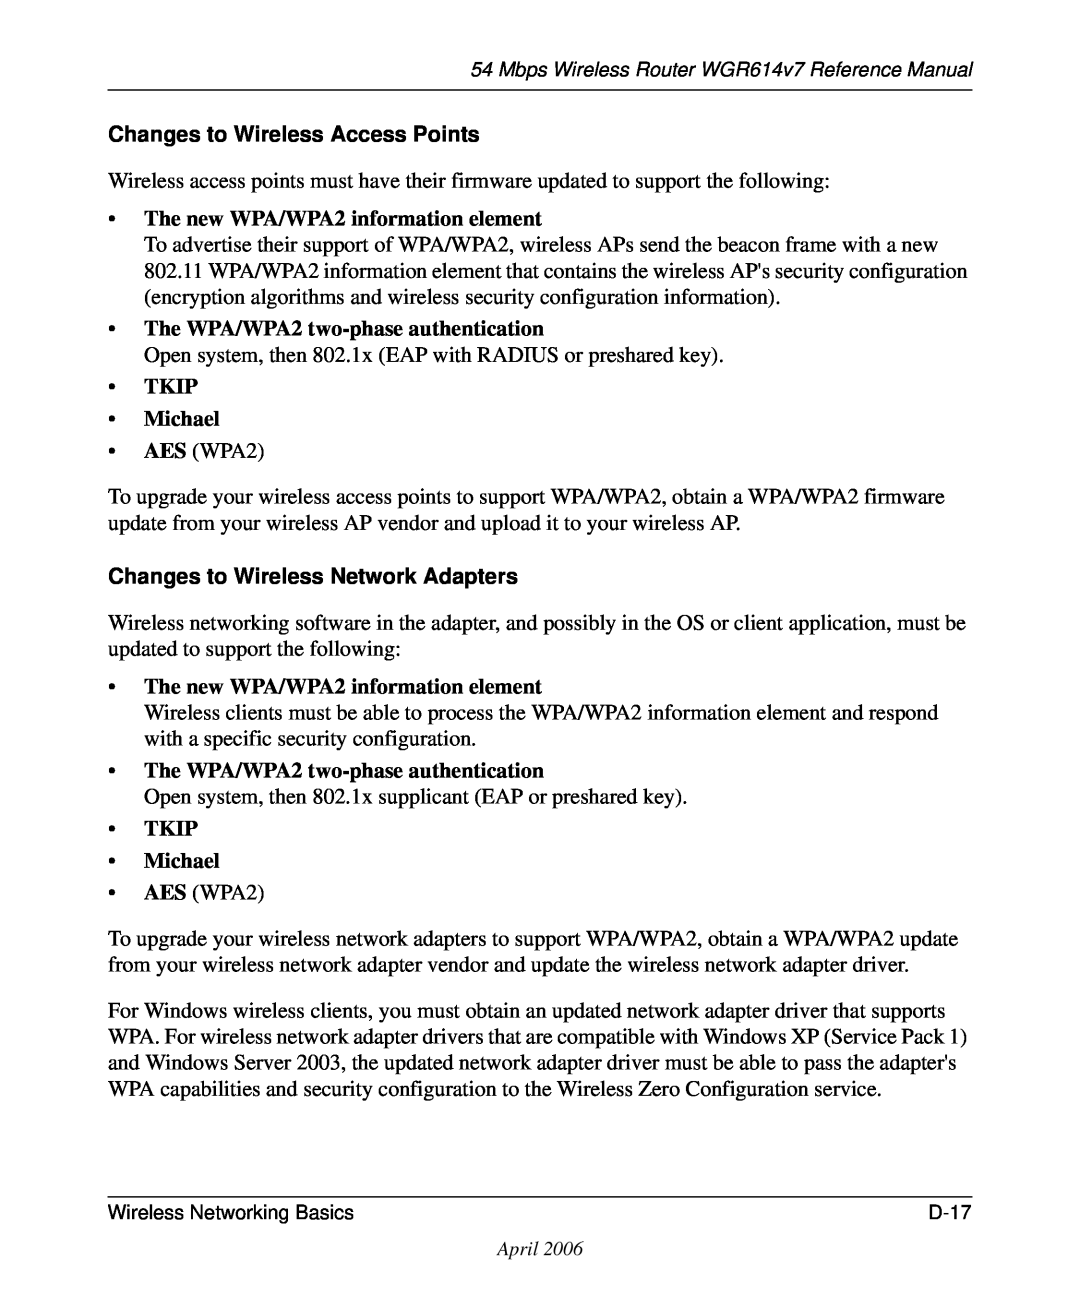 NETGEAR WGR614v7 manual Changes to Wireless Access Points, The new WPA/WPA2 information element, TKIP Michael 